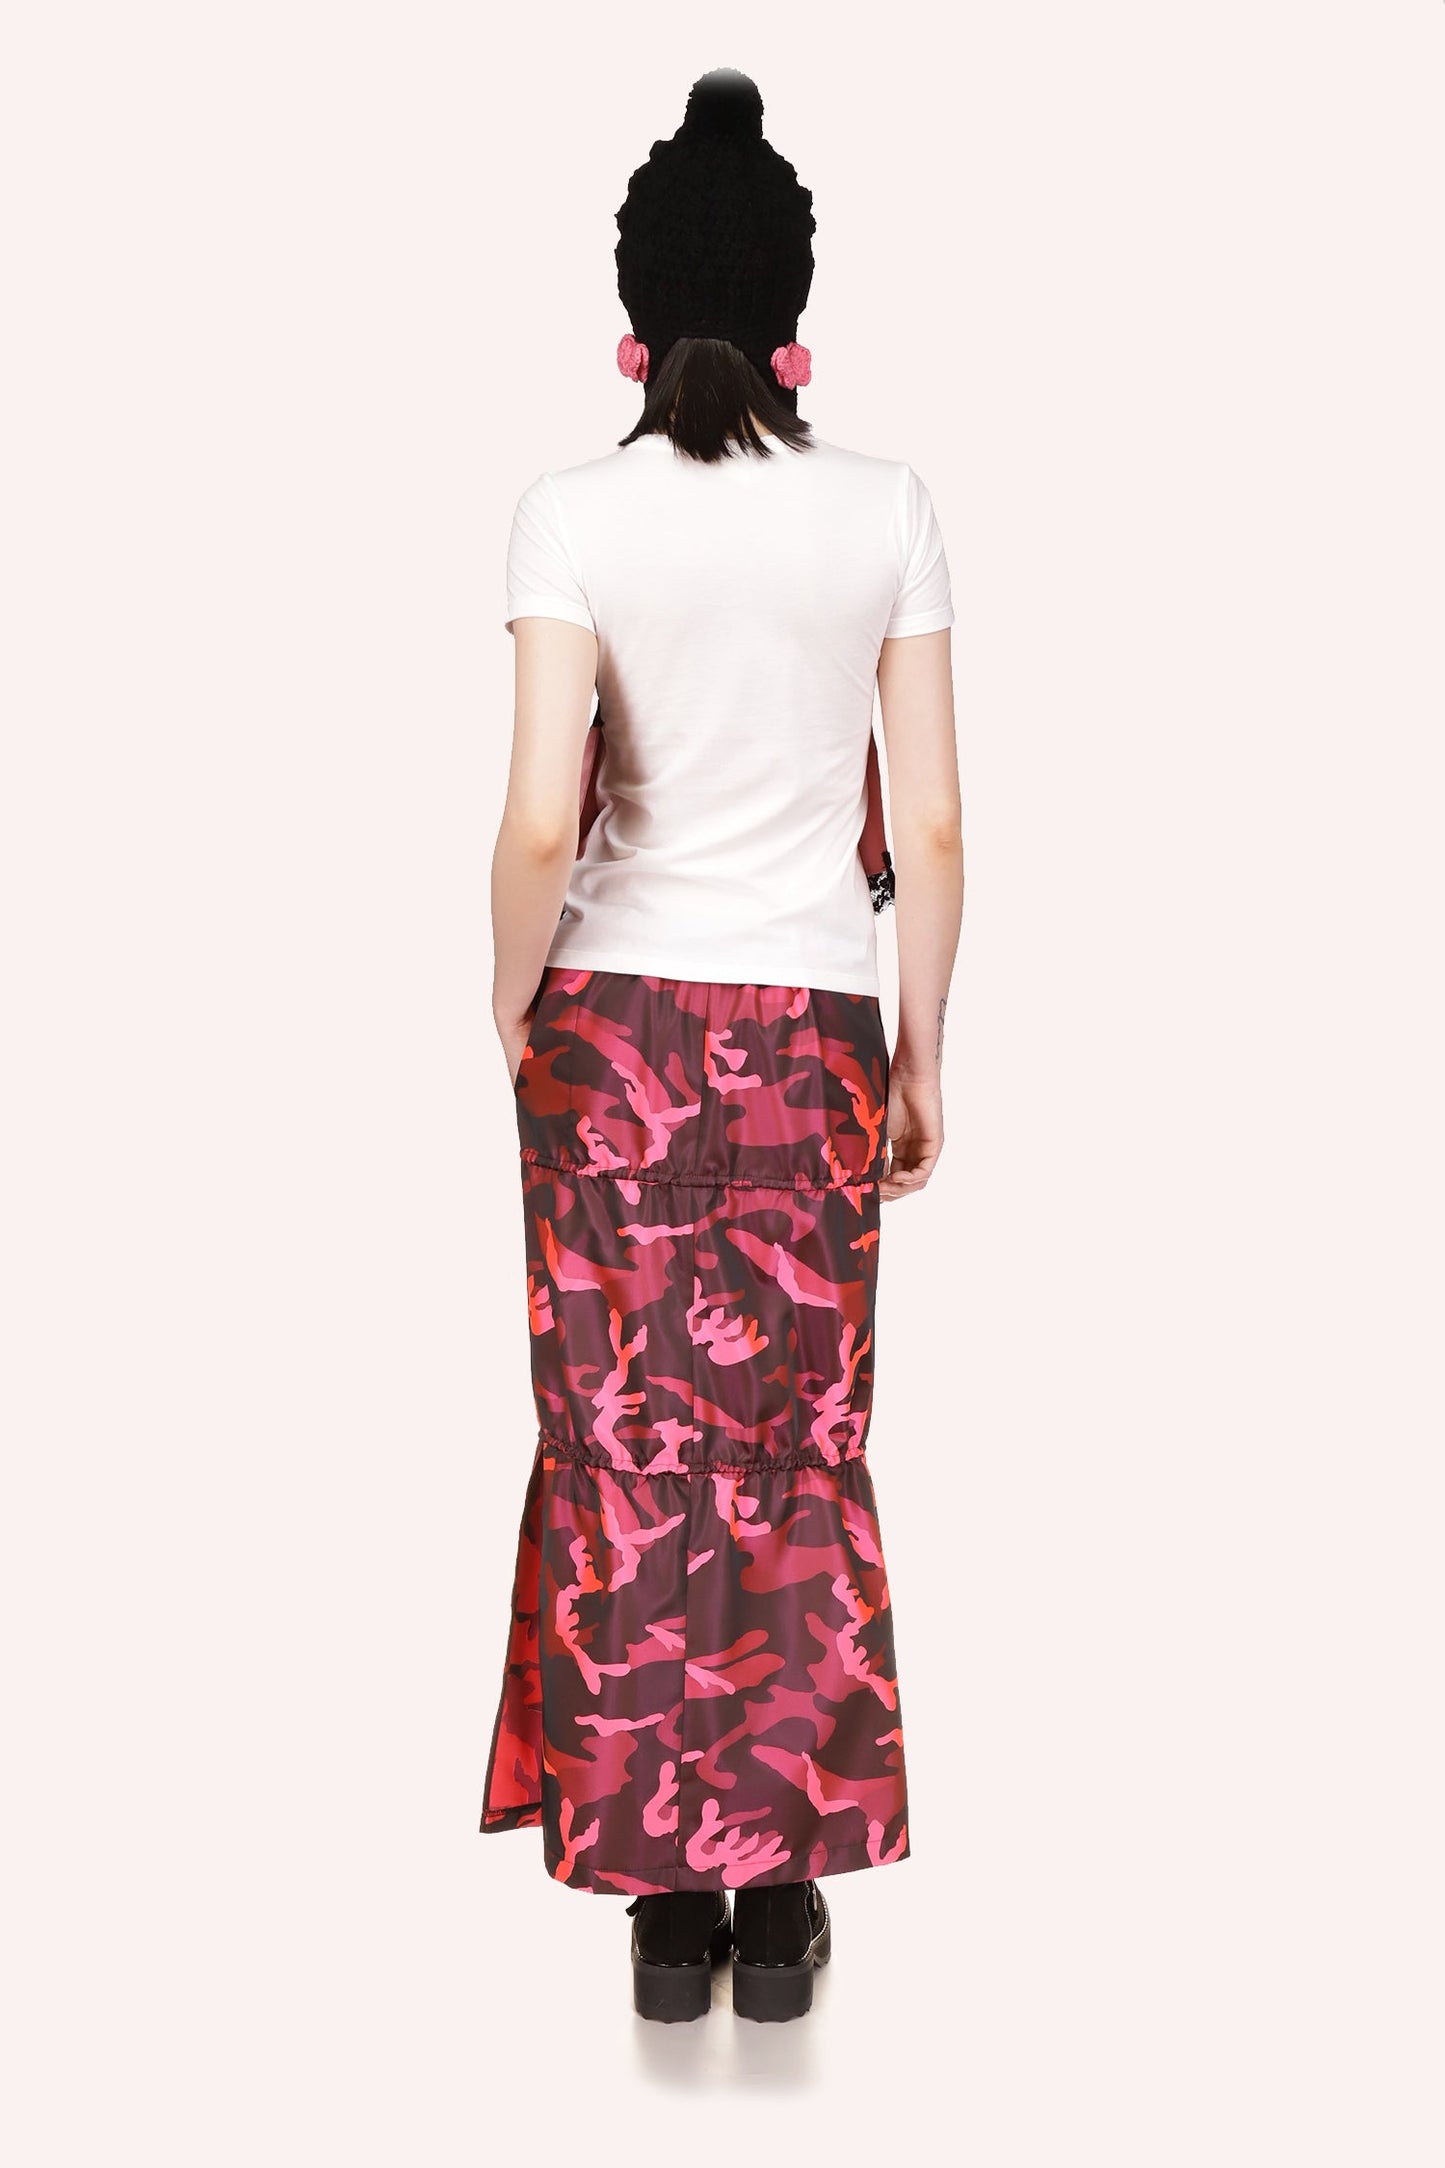 Ankle-long skirt, Camouflage Style , 3 levels, side cut from knee, side pocket, 2-laces to adjust